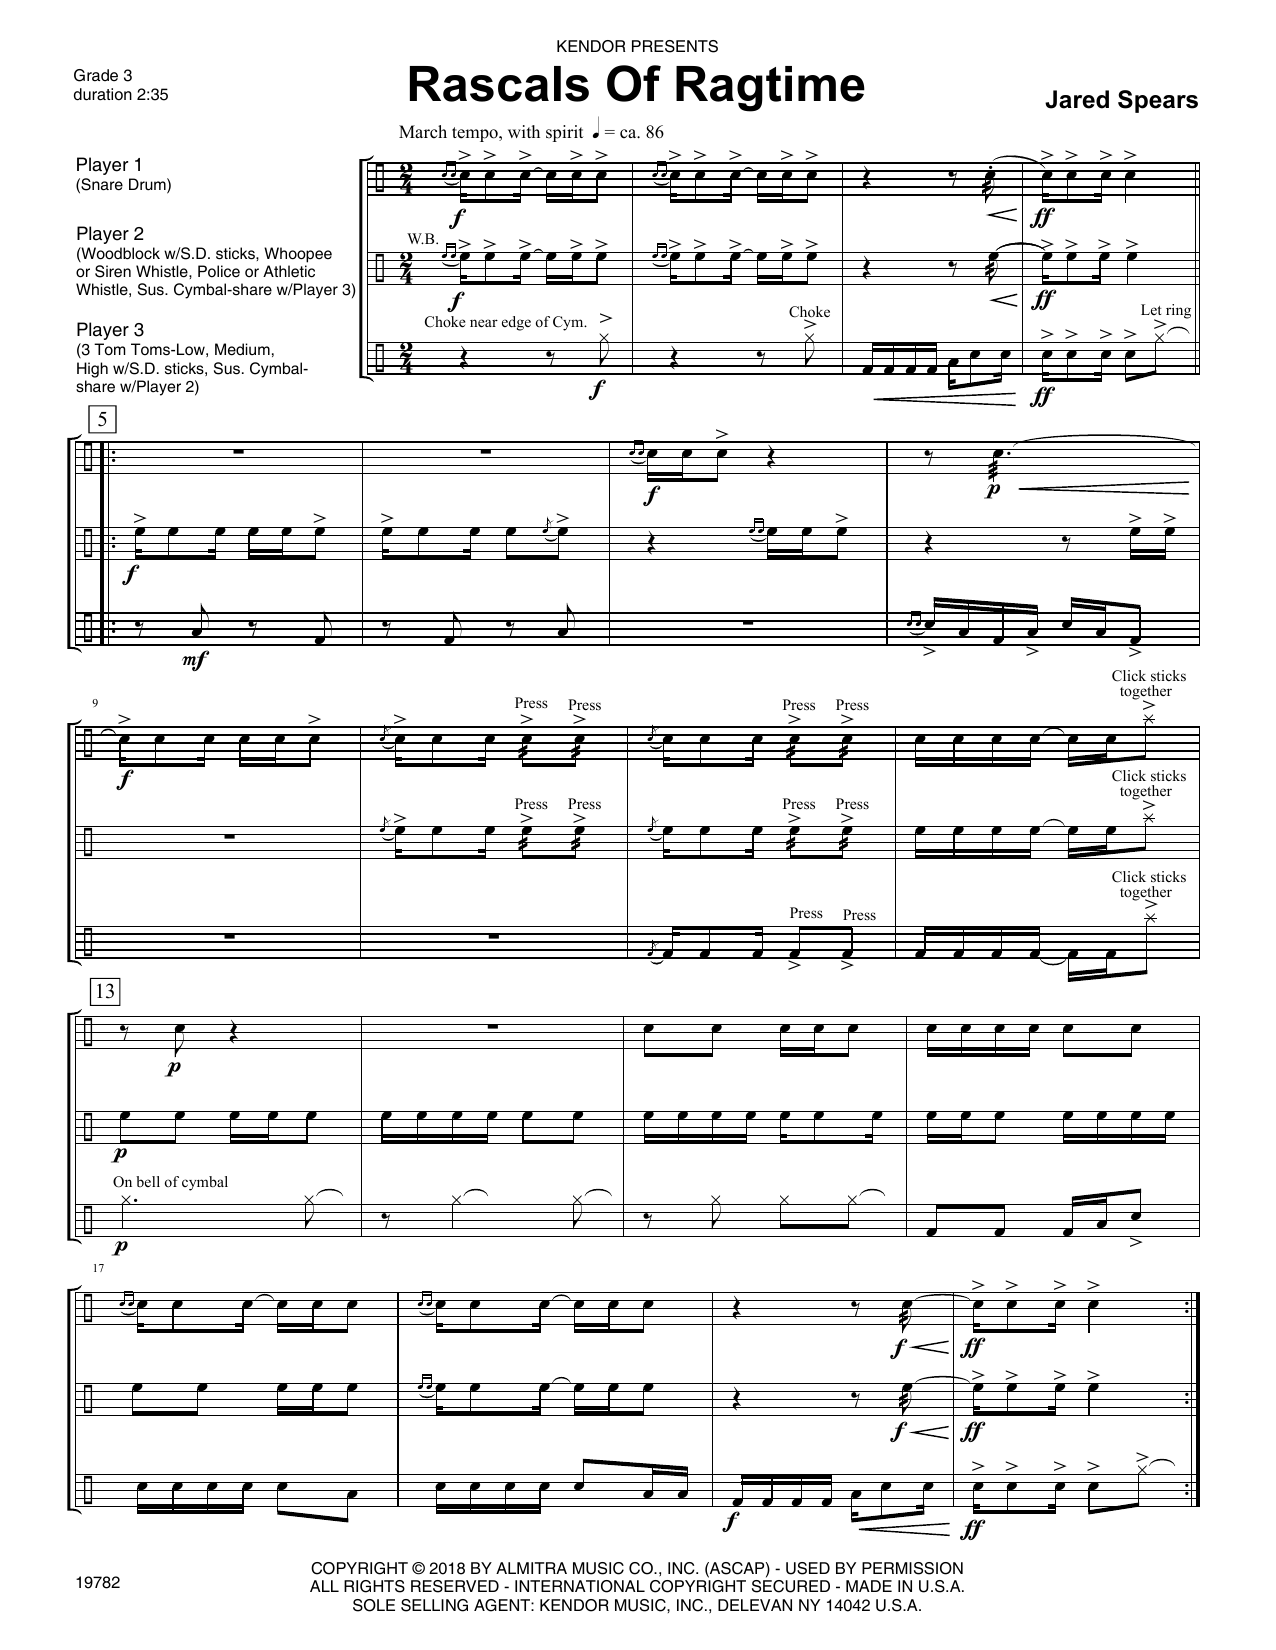 Download Jared Spears Rascals Of Ragtime - Full Score Sheet Music